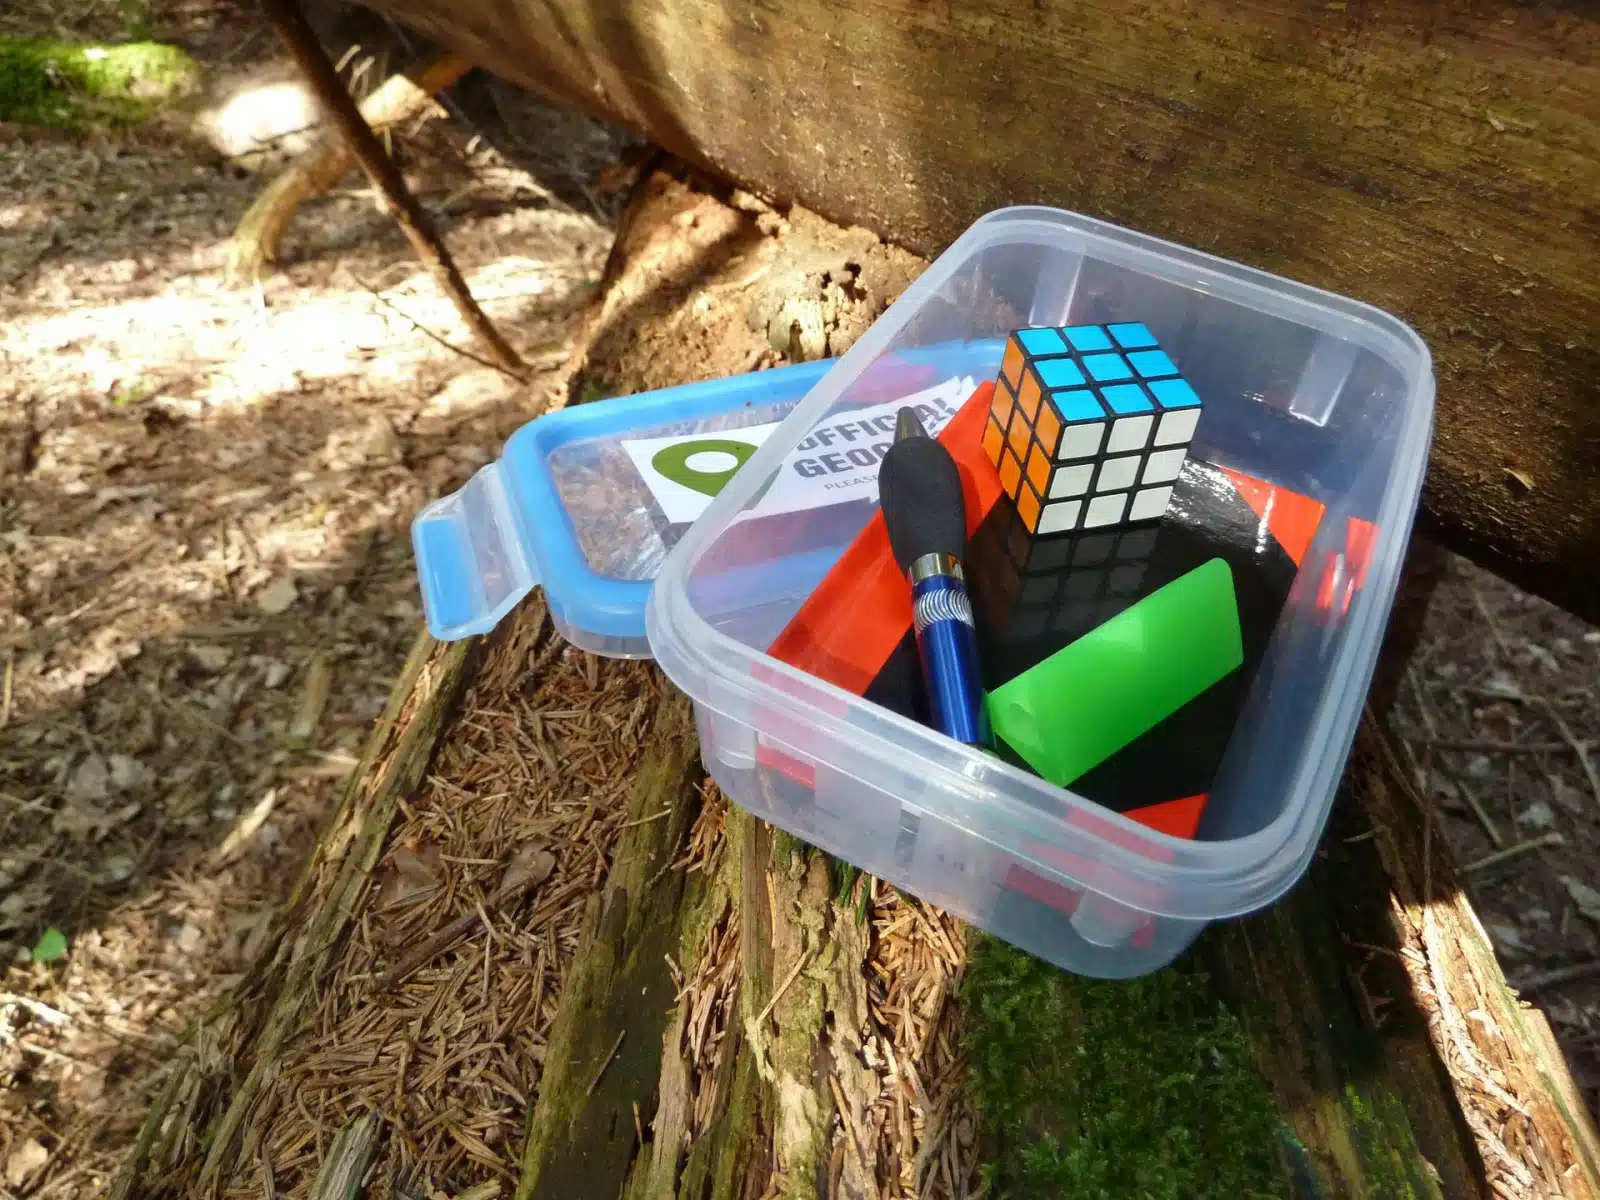 Geo-Caching - A Super Fun Activity to Do While Camping